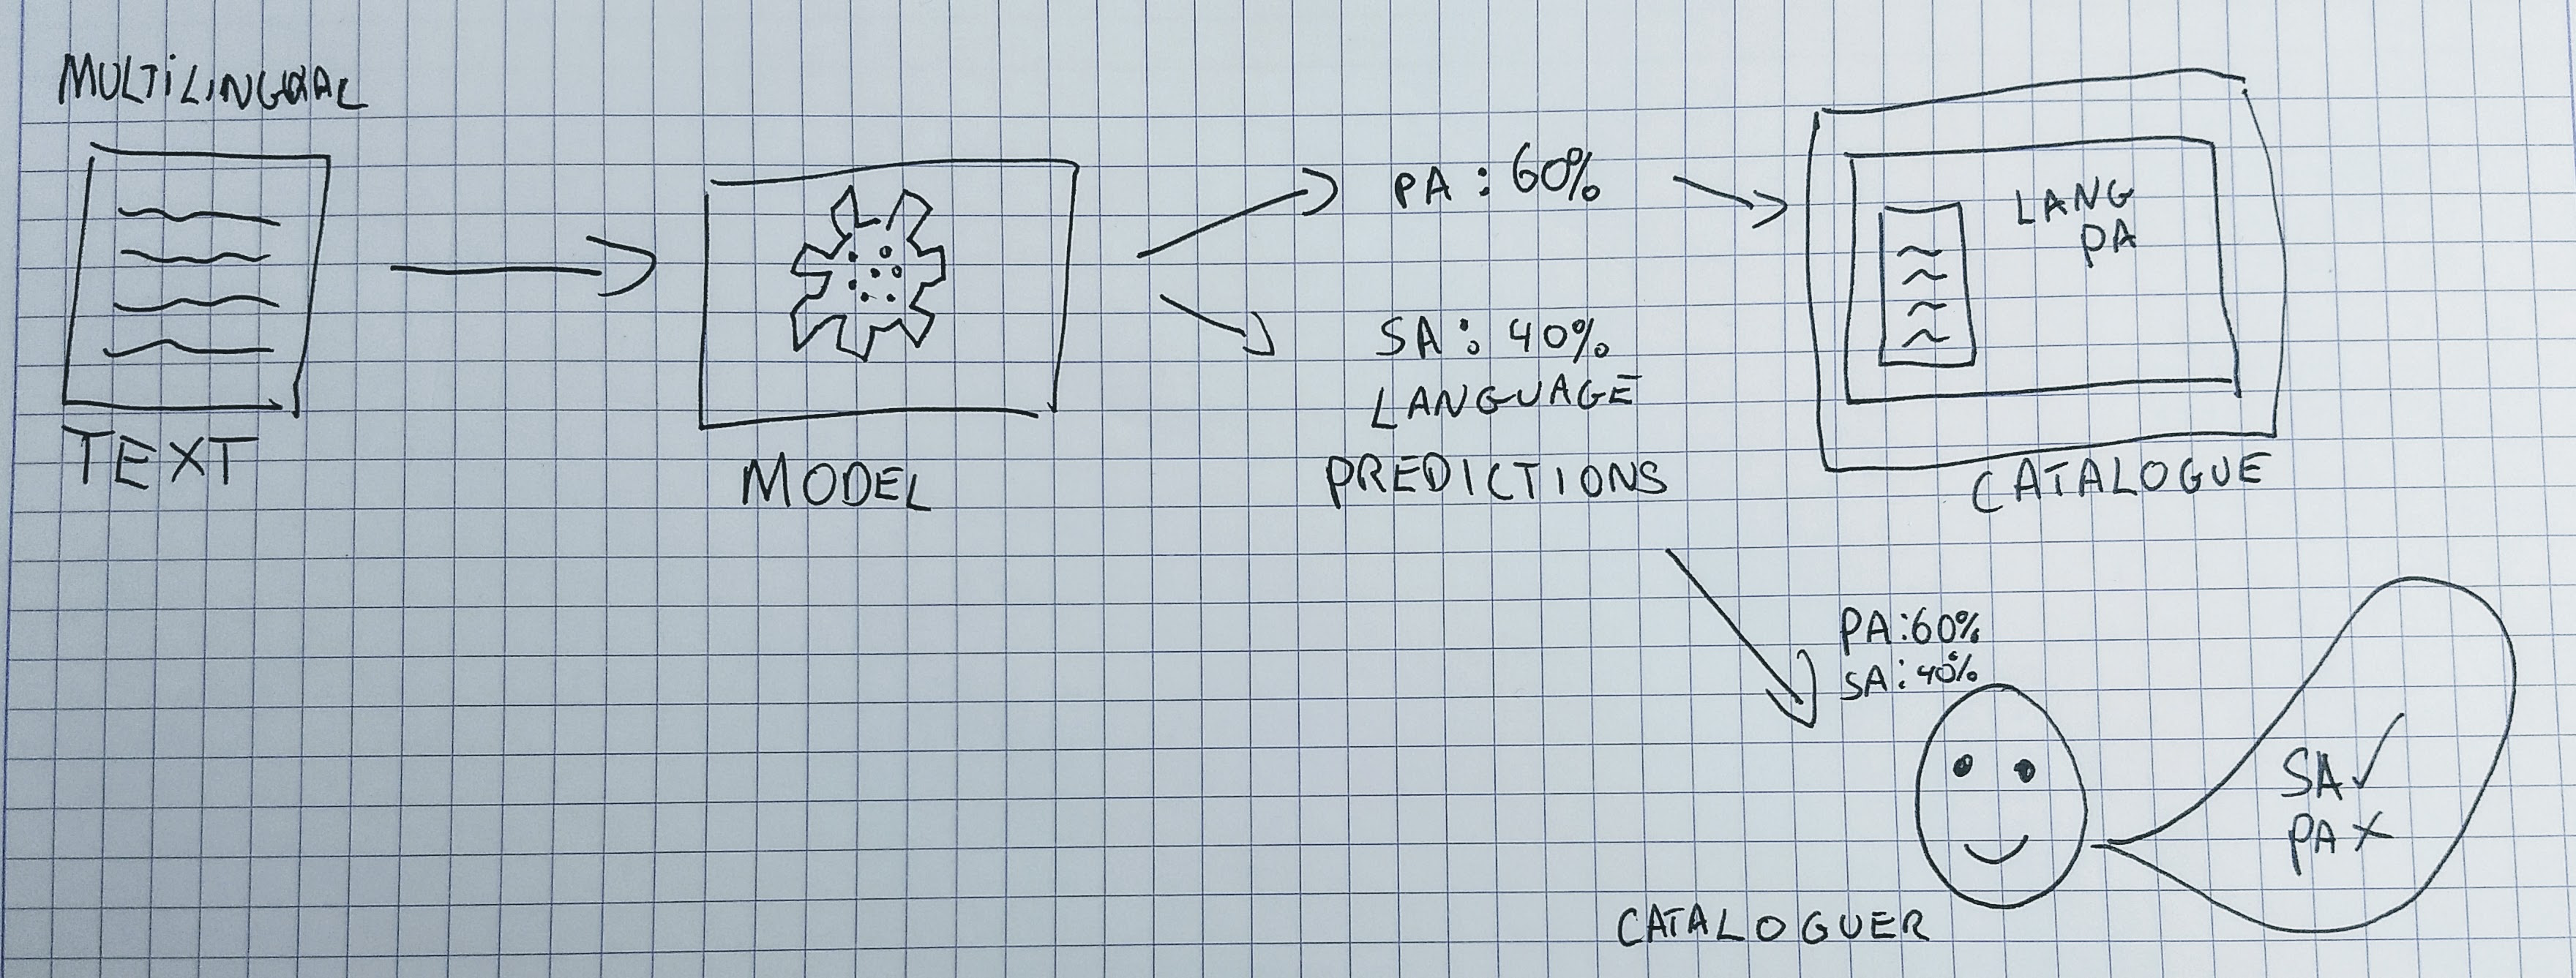 Two possible ways of using Machine Learning Predictions